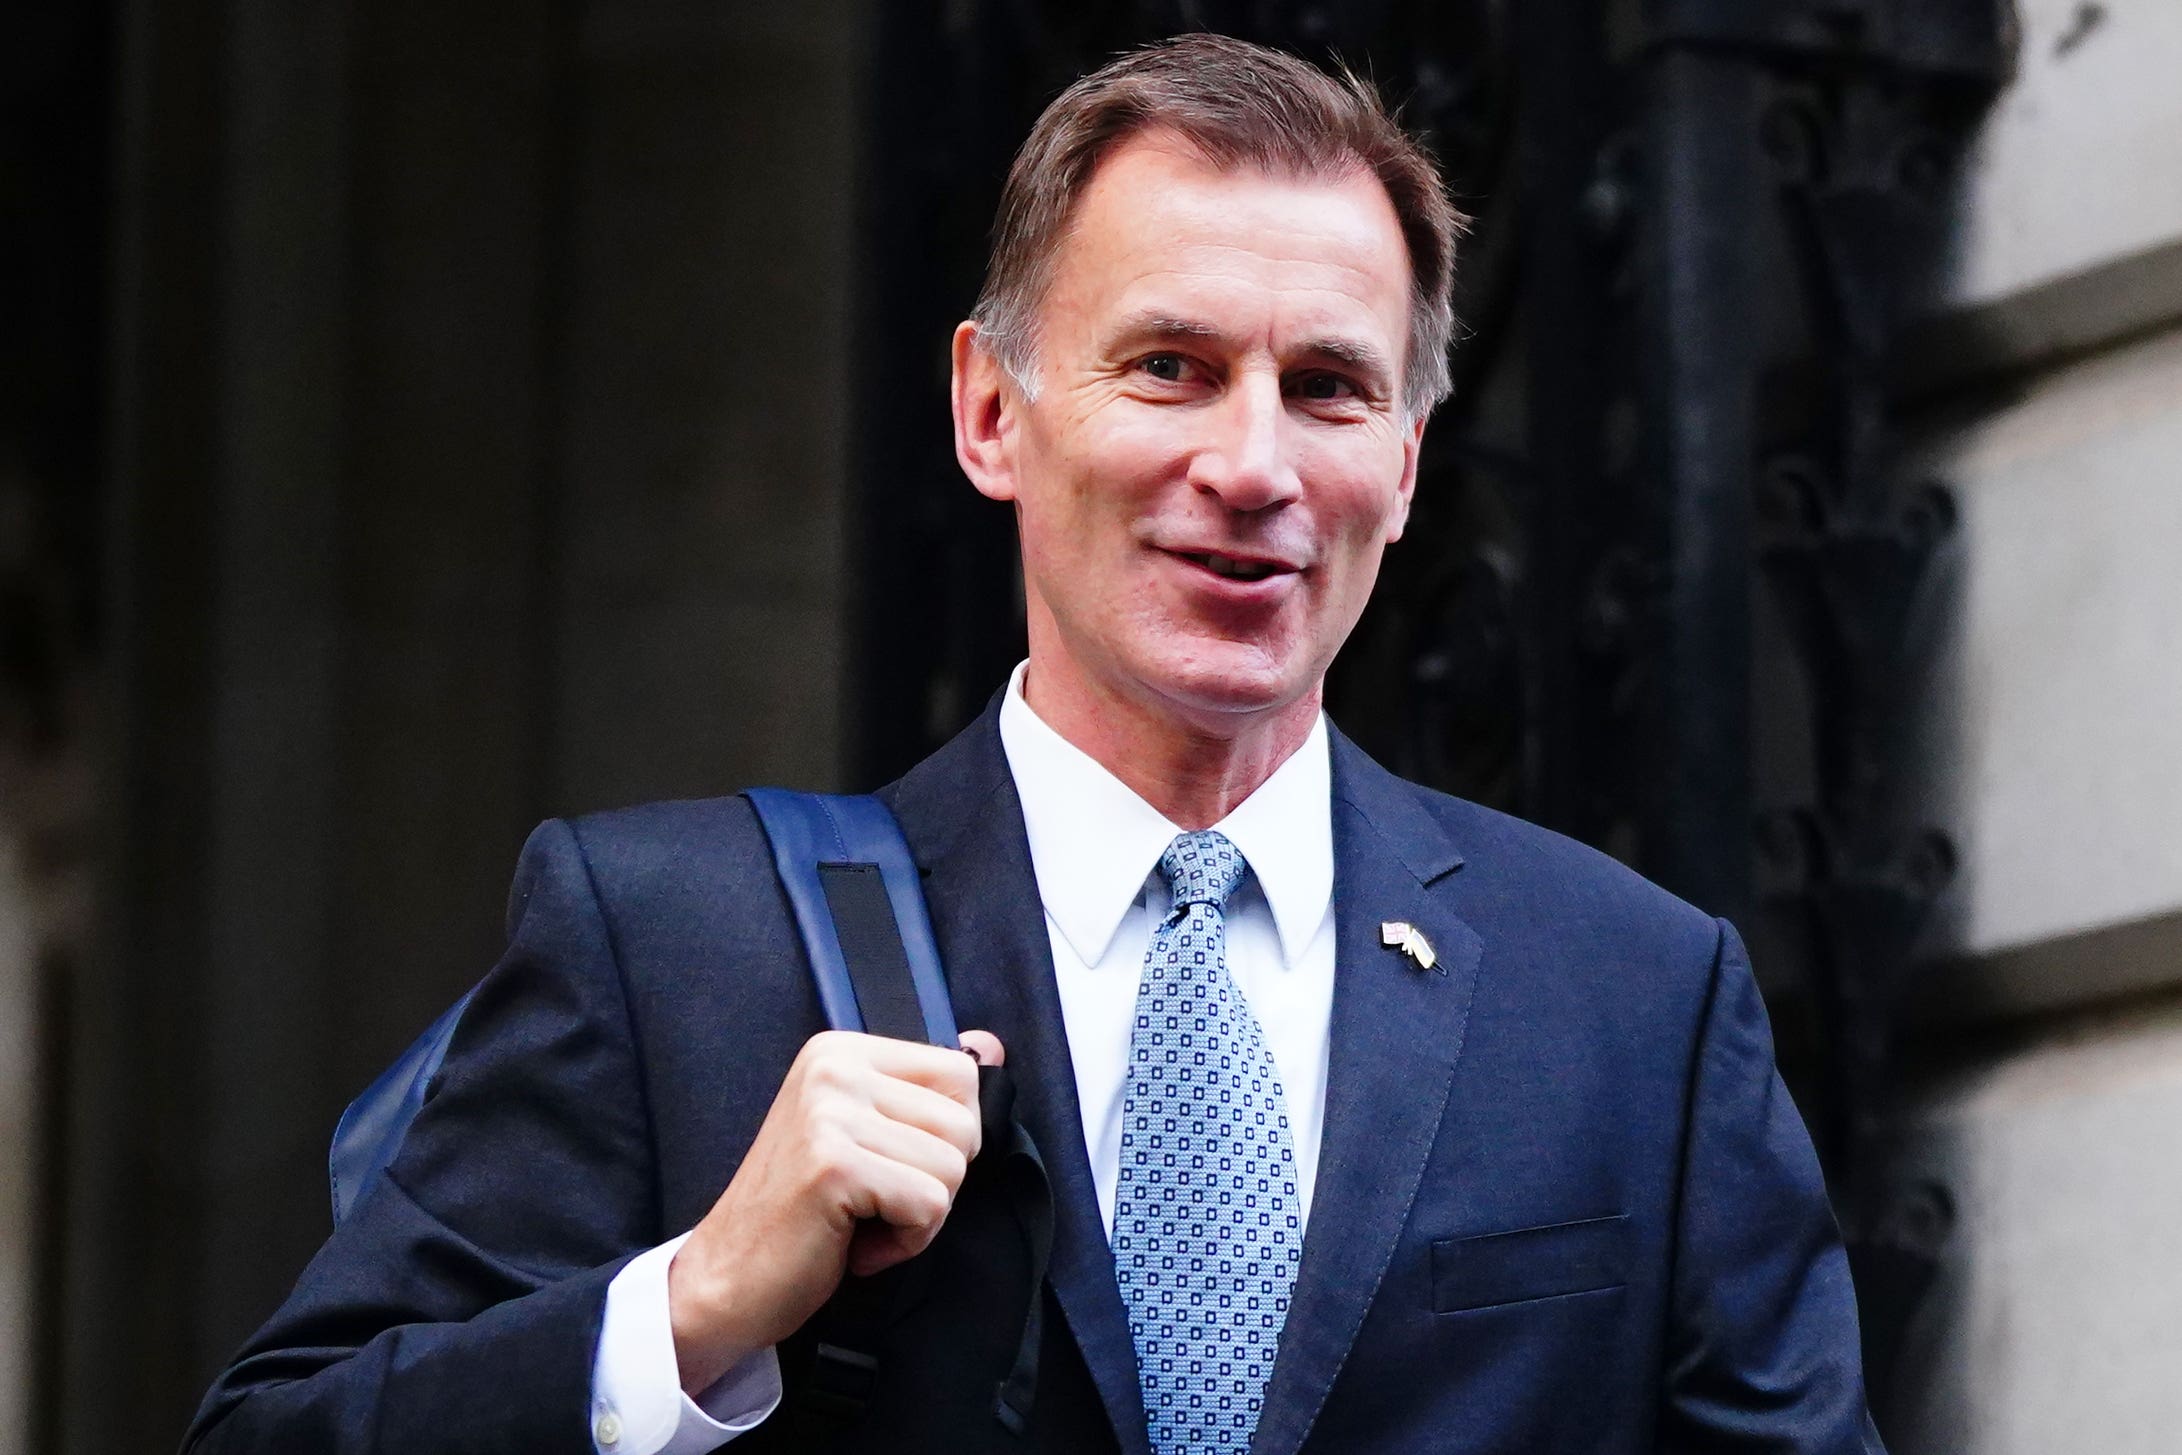 In Jeremy Hunt’s South West Surrey constituency, the Lib Dems gained five seats, Labour picked up two, and the Conservatives lost eight